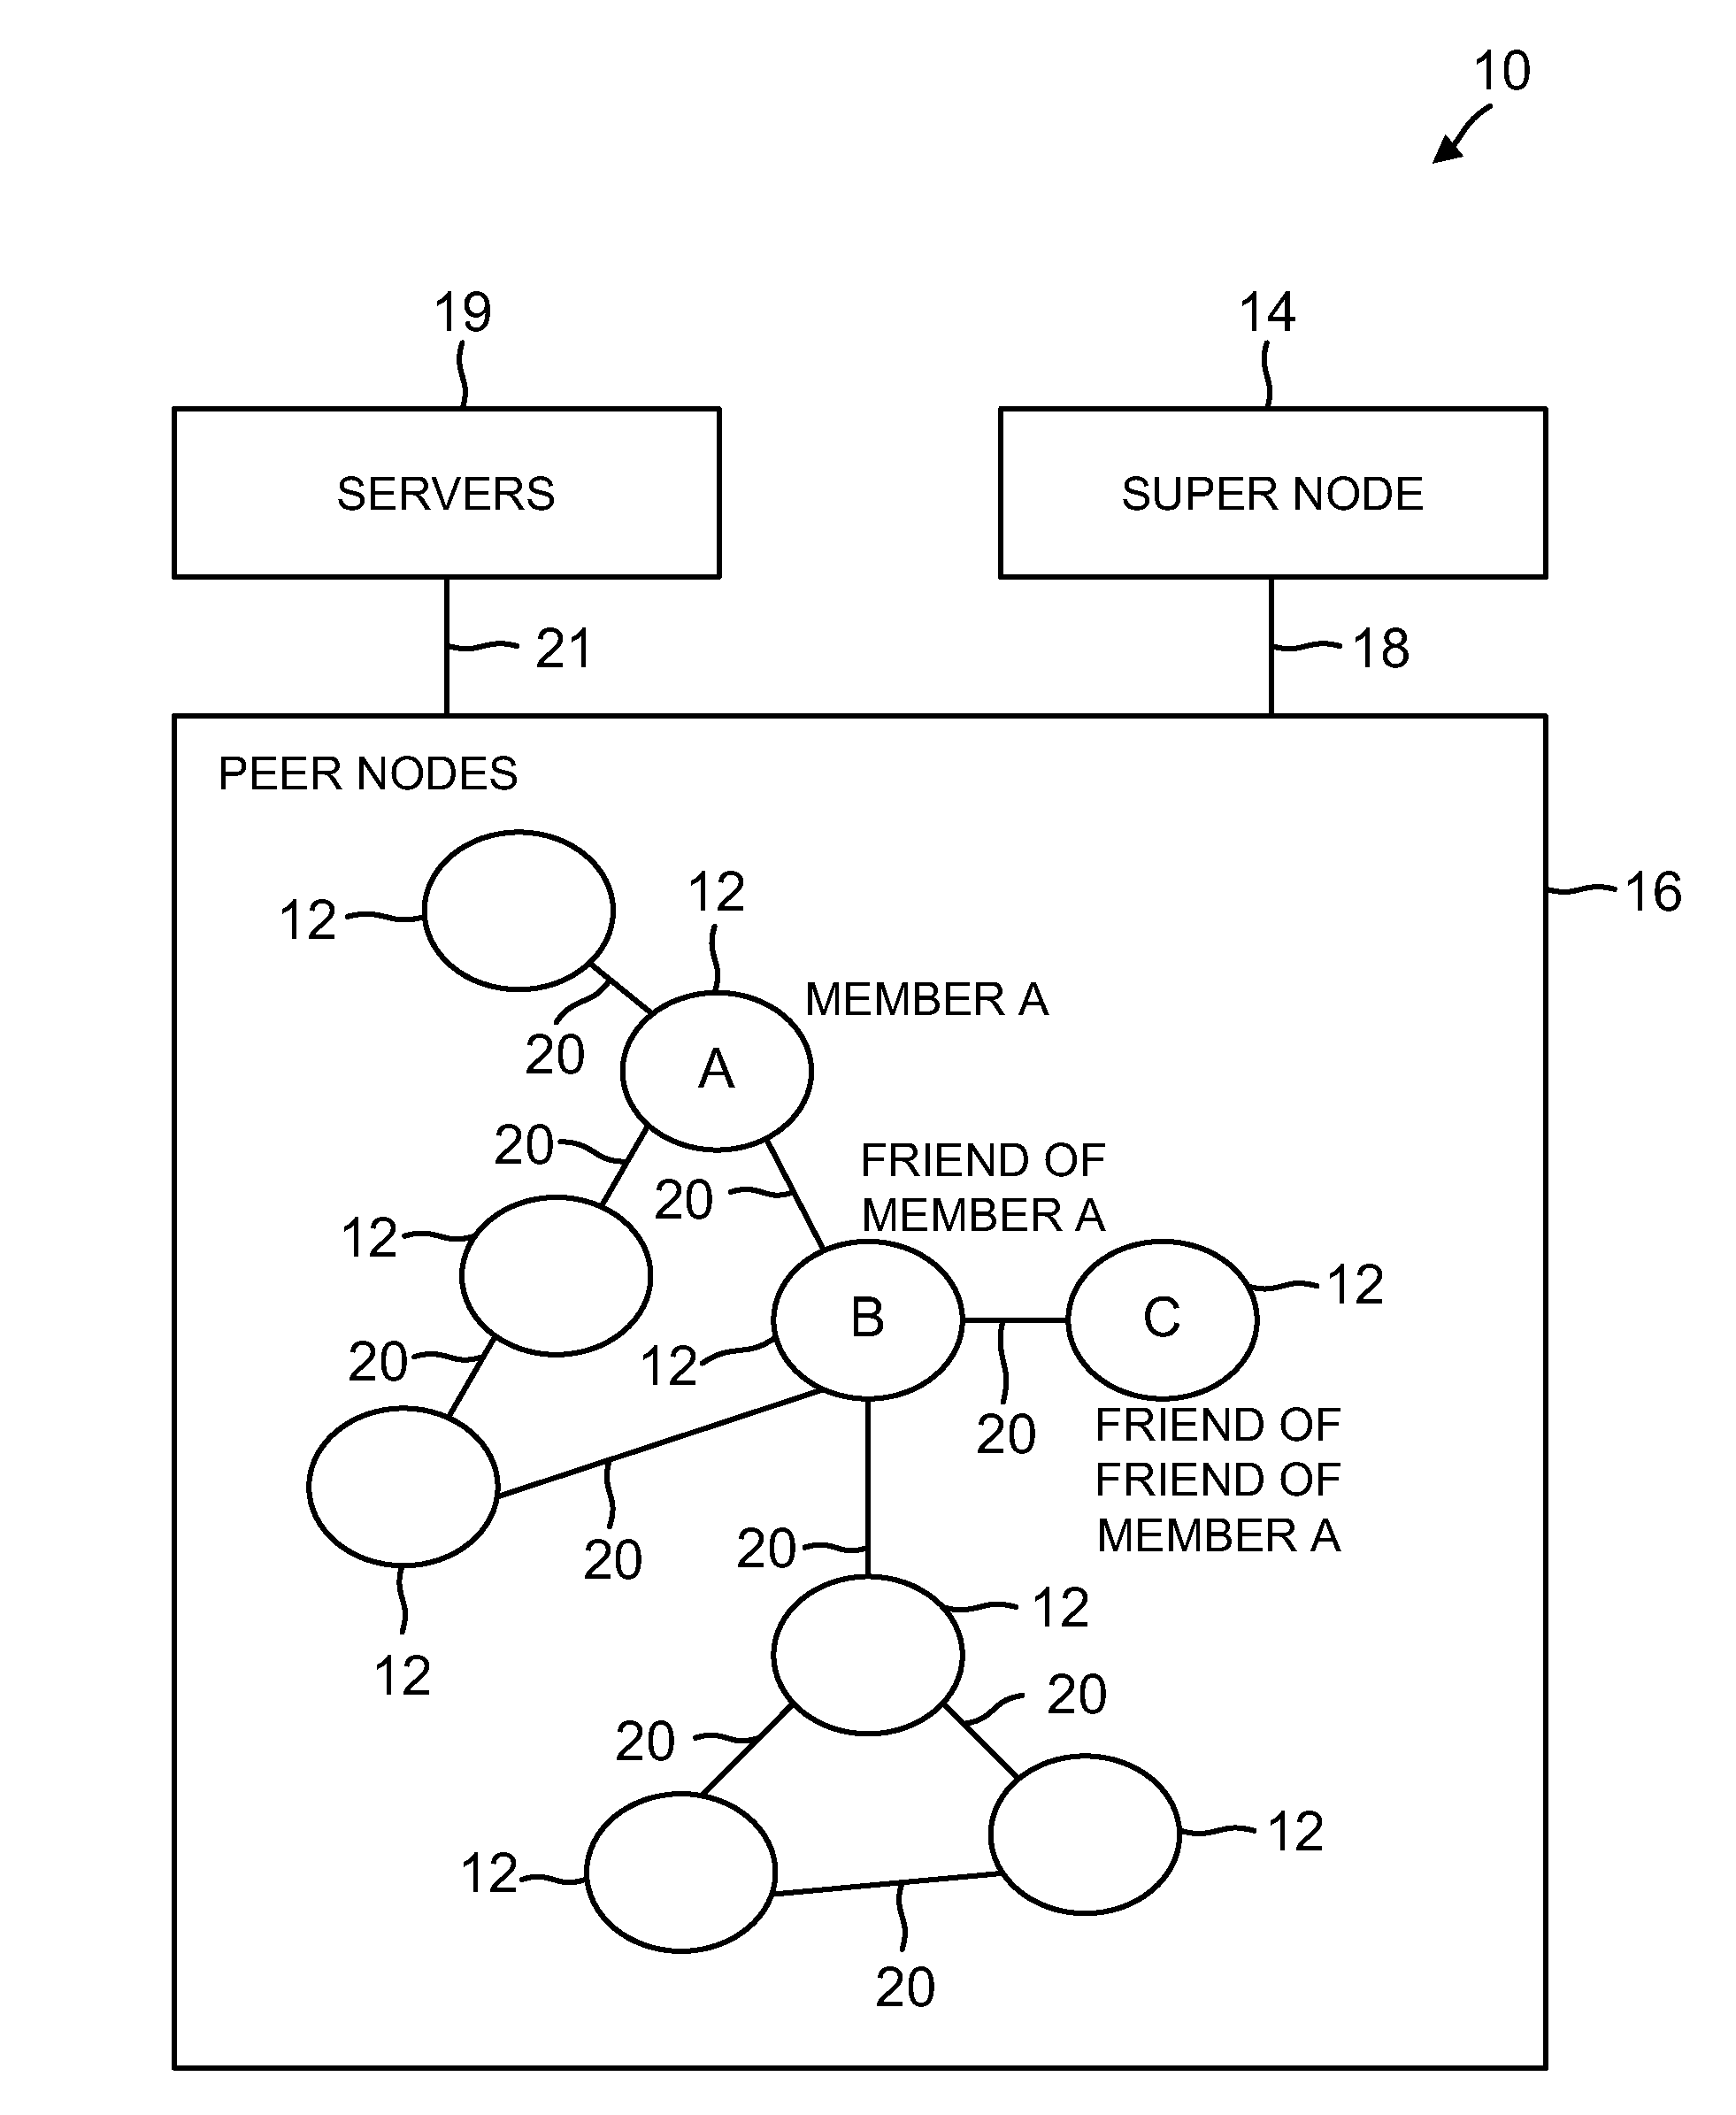 Peer-based communications system with scalable data model